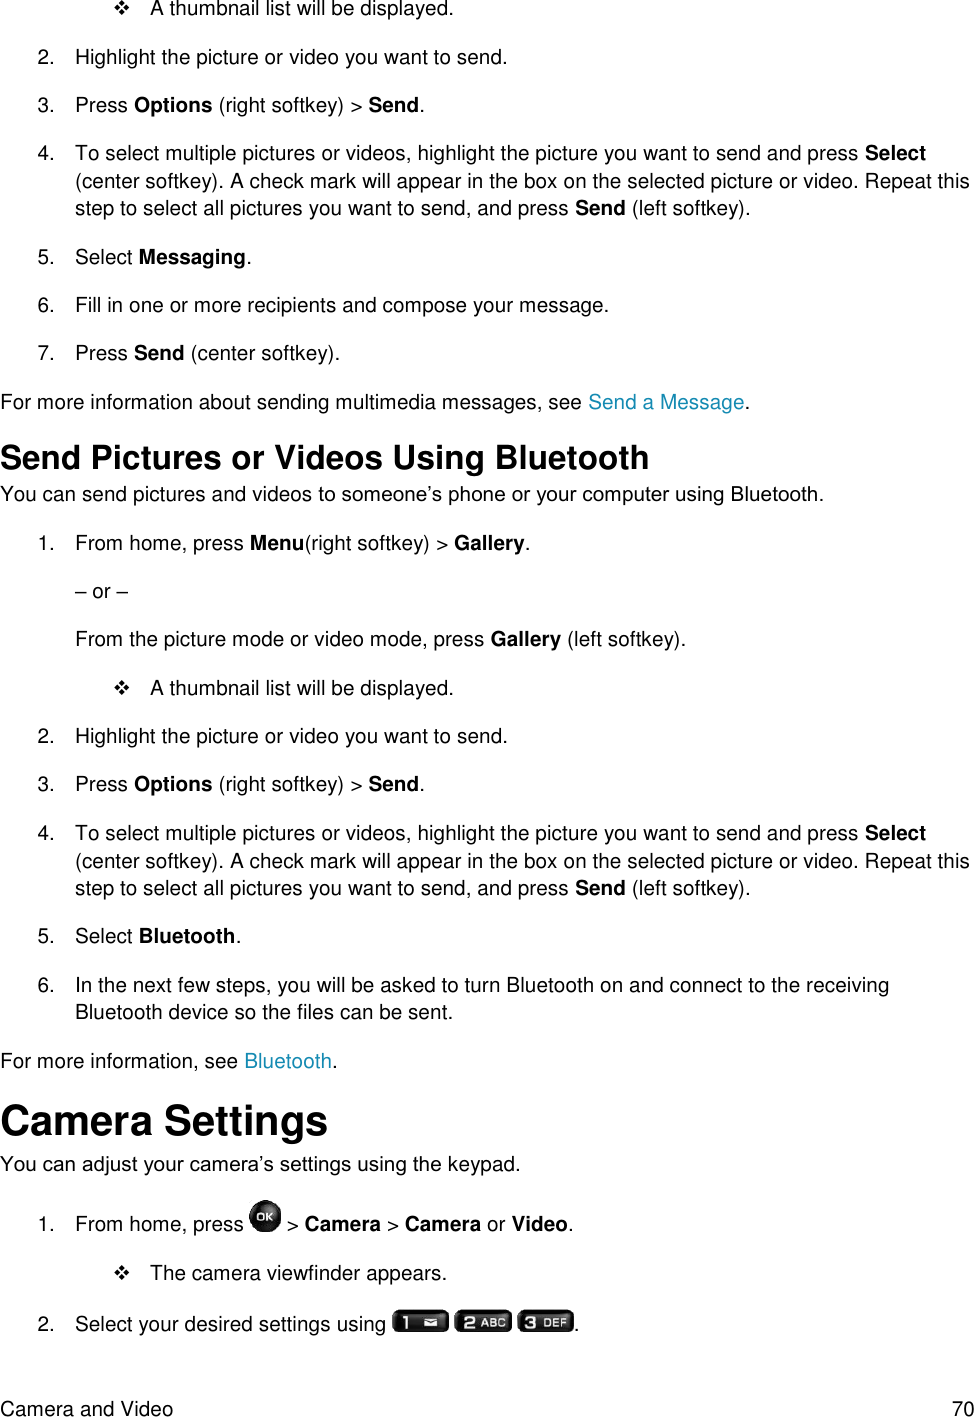 Camera and Video  70   A thumbnail list will be displayed. 2.  Highlight the picture or video you want to send. 3.  Press Options (right softkey) &gt; Send. 4.  To select multiple pictures or videos, highlight the picture you want to send and press Select (center softkey). A check mark will appear in the box on the selected picture or video. Repeat this step to select all pictures you want to send, and press Send (left softkey). 5.  Select Messaging. 6.  Fill in one or more recipients and compose your message. 7.  Press Send (center softkey). For more information about sending multimedia messages, see Send a Message. Send Pictures or Videos Using Bluetooth You can send pictures and videos to someone’s phone or your computer using Bluetooth. 1.  From home, press Menu(right softkey) &gt; Gallery.  – or – From the picture mode or video mode, press Gallery (left softkey).   A thumbnail list will be displayed. 2.  Highlight the picture or video you want to send. 3.  Press Options (right softkey) &gt; Send. 4.  To select multiple pictures or videos, highlight the picture you want to send and press Select (center softkey). A check mark will appear in the box on the selected picture or video. Repeat this step to select all pictures you want to send, and press Send (left softkey). 5.  Select Bluetooth. 6.  In the next few steps, you will be asked to turn Bluetooth on and connect to the receiving Bluetooth device so the files can be sent.  For more information, see Bluetooth. Camera Settings You can adjust your camera’s settings using the keypad. 1.  From home, press   &gt; Camera &gt; Camera or Video.   The camera viewfinder appears. 2.  Select your desired settings using      . 